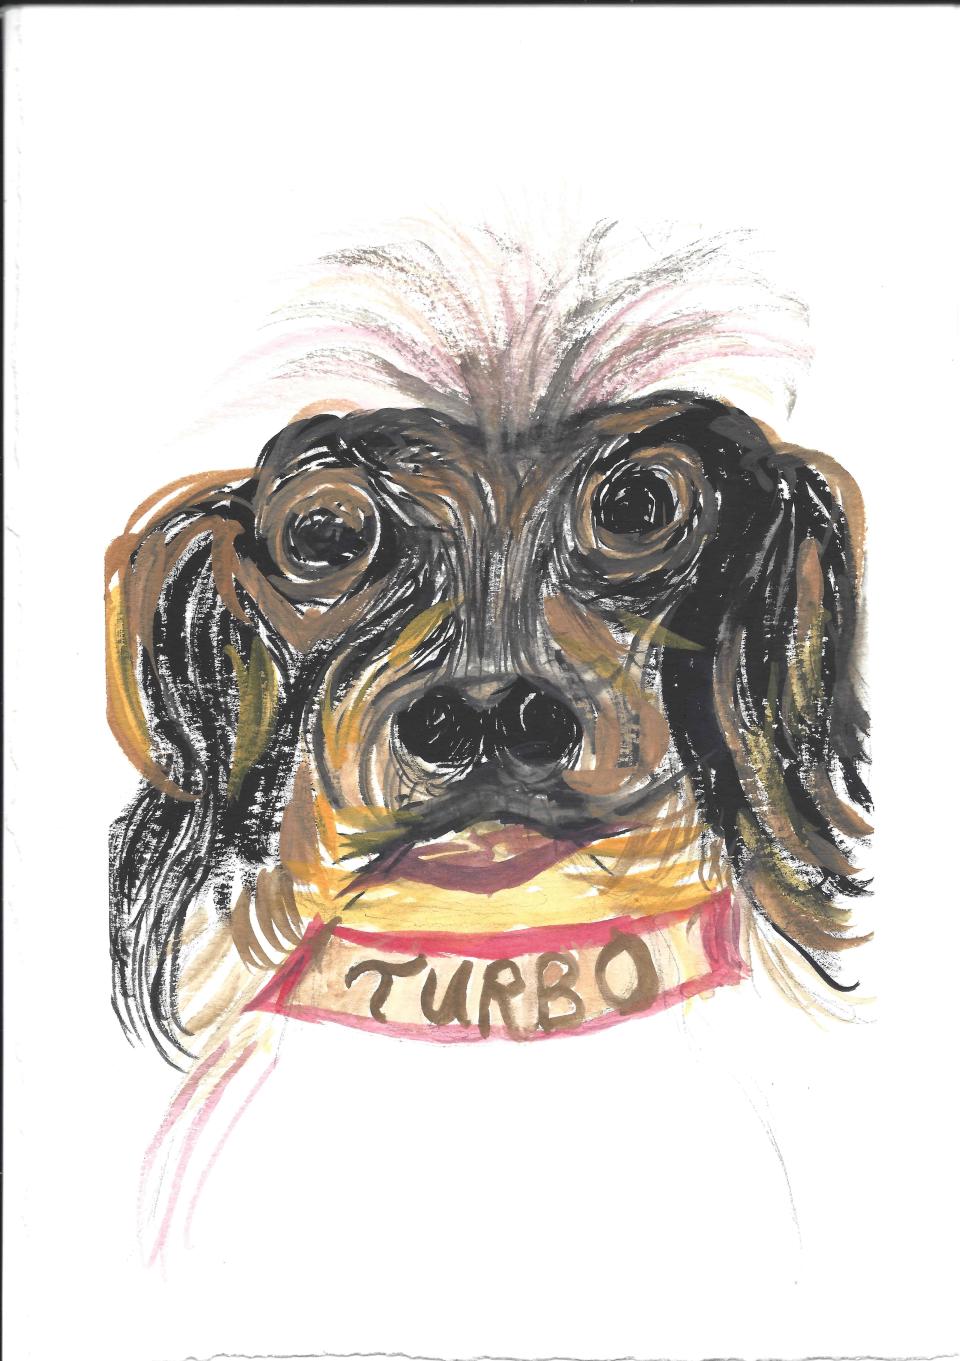 The label on Amber to #ENDALZ features artwork from the Memories in the Making program, created by Connie from Milwaukee Catholic Home. The painting, which showcases a dog named Turbo, aligns with Bare Bones Brewery’s support for animal nonprofits.